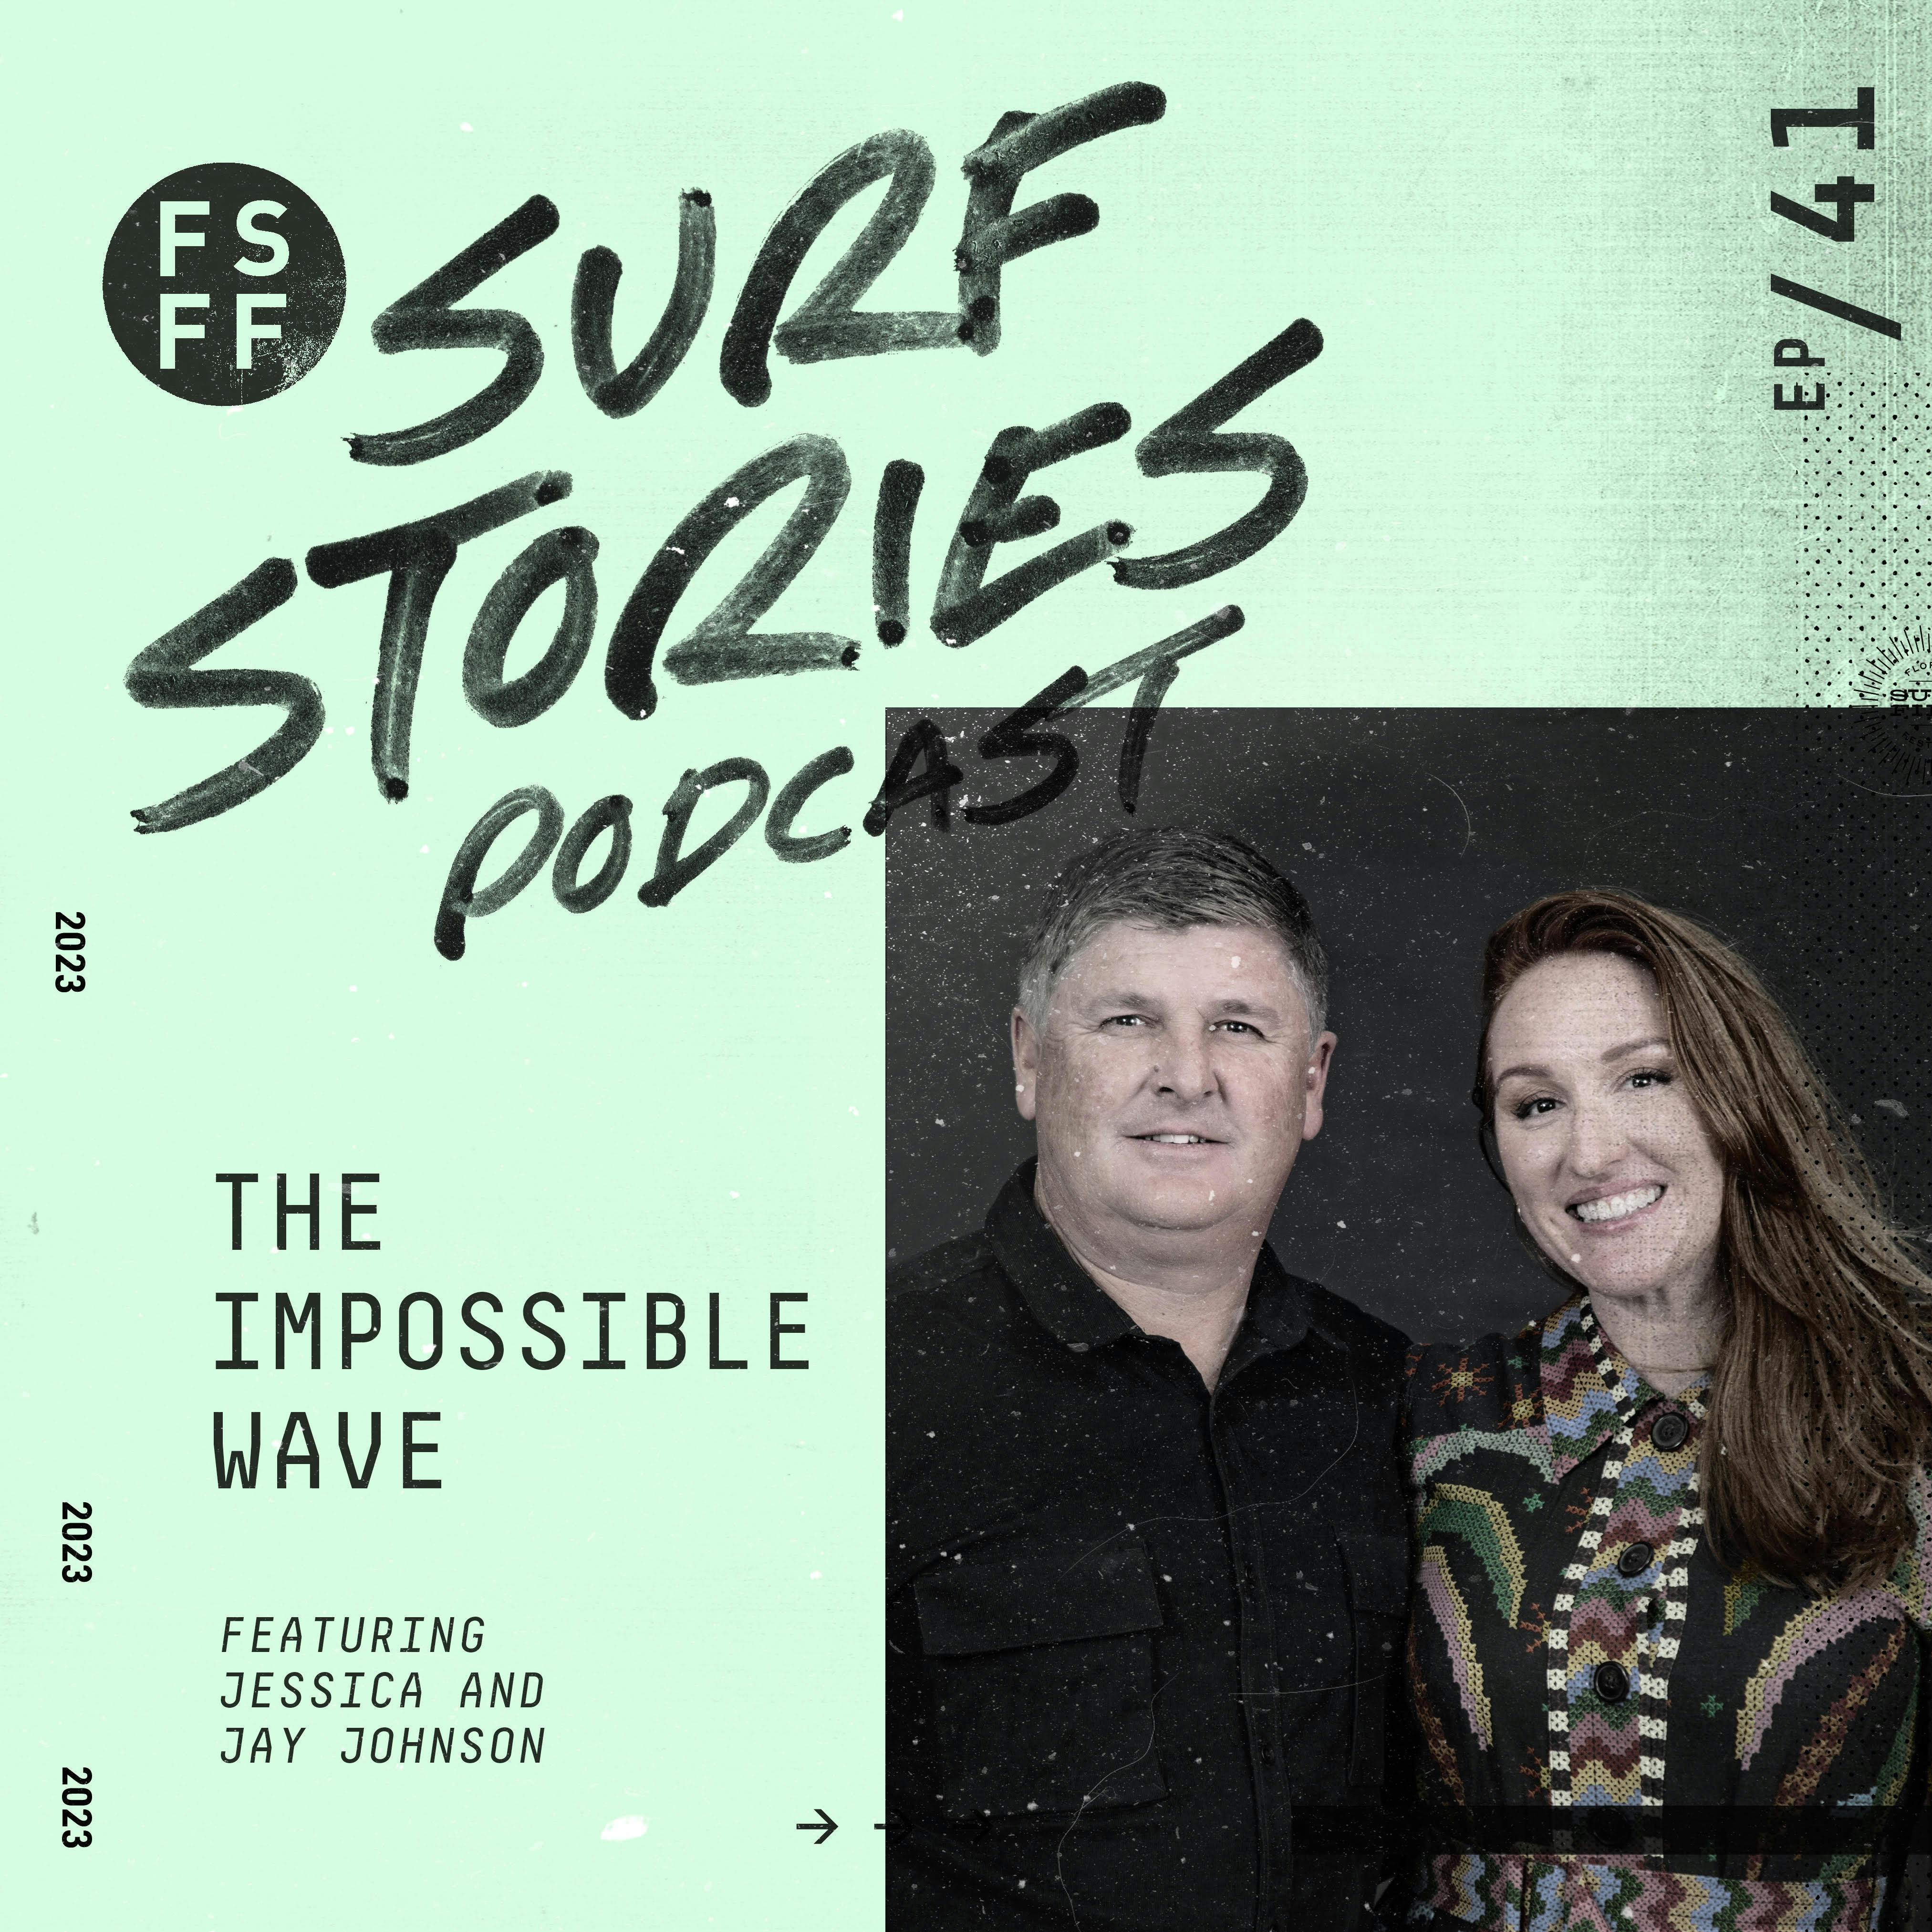 The Impossible Wave with Jessica and Jay Johnson